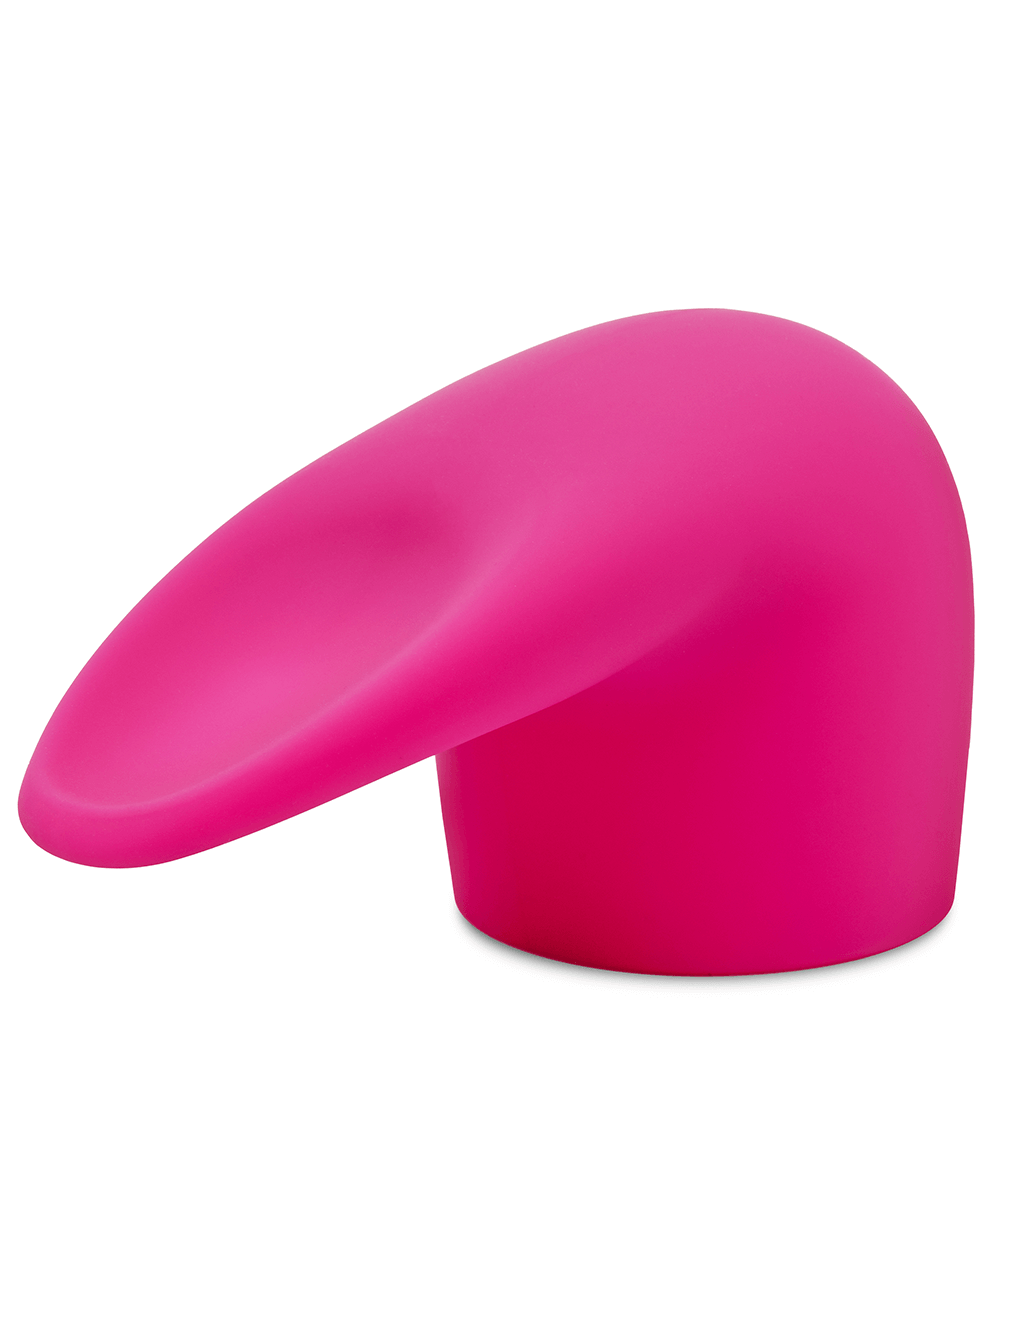 Le Wand Flick Attachment - Pink - Front